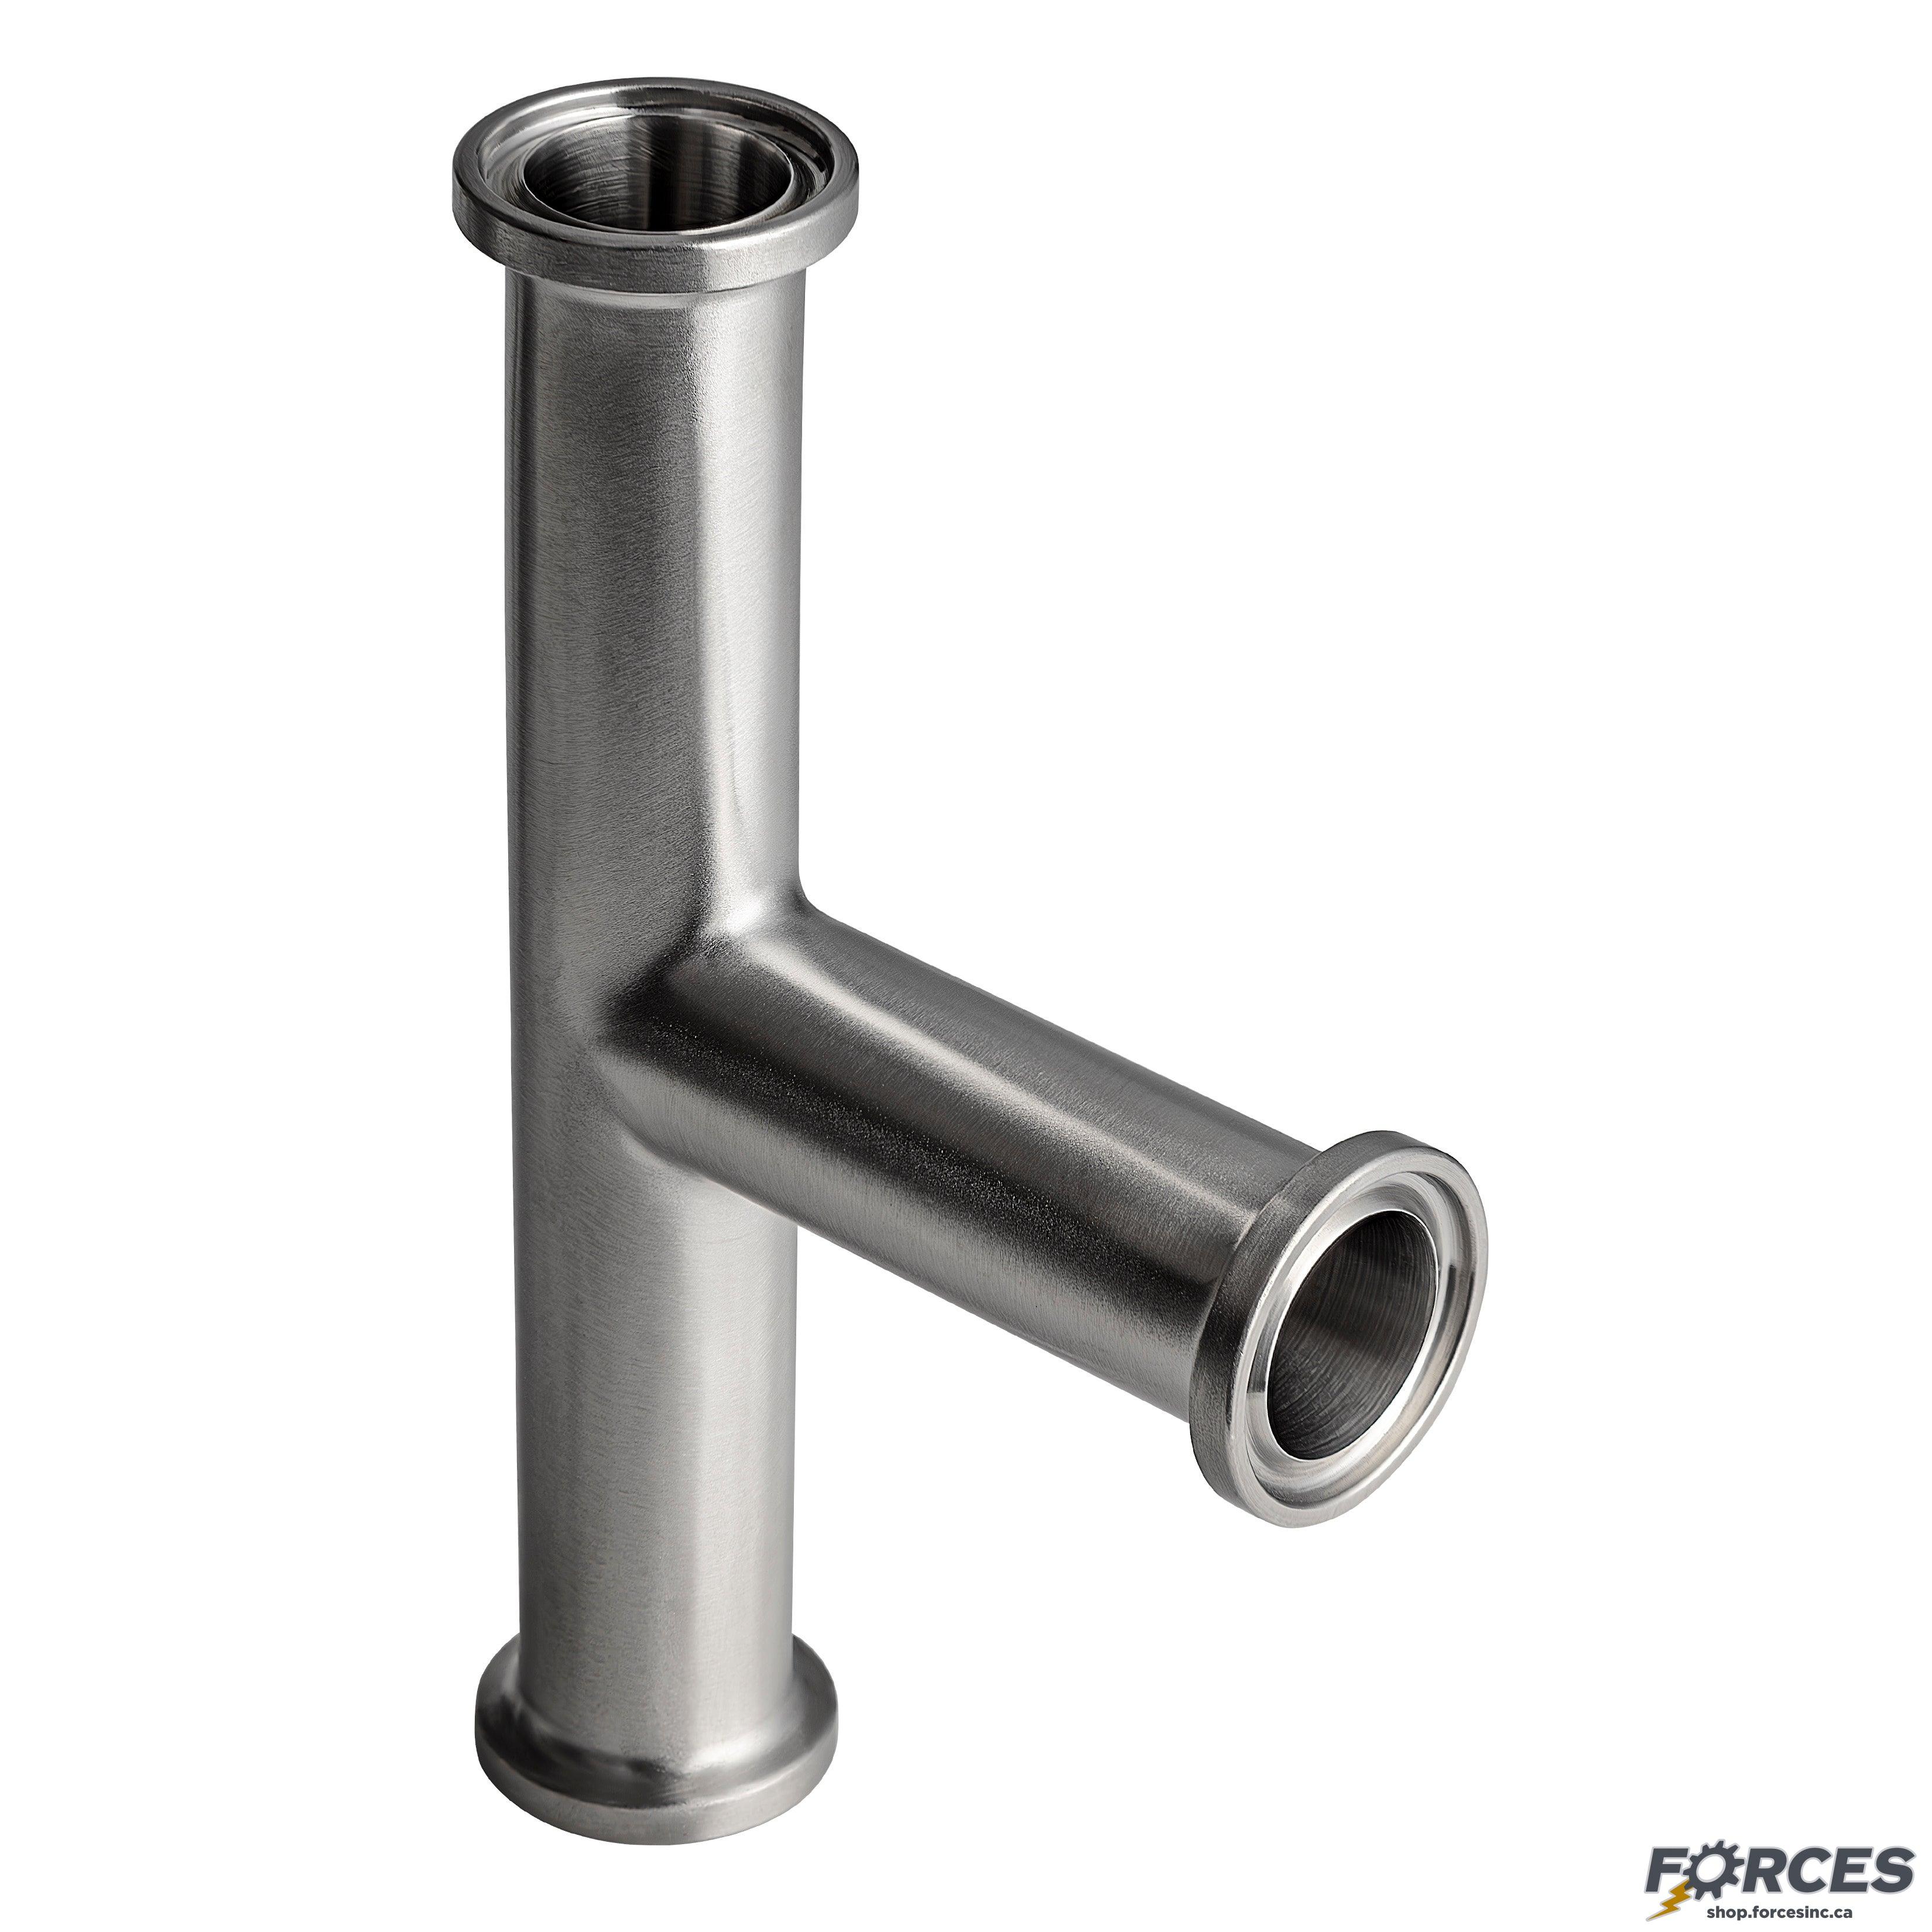 8" Tri-Clamp Tee - Stainless Steel 304 - Forces Inc